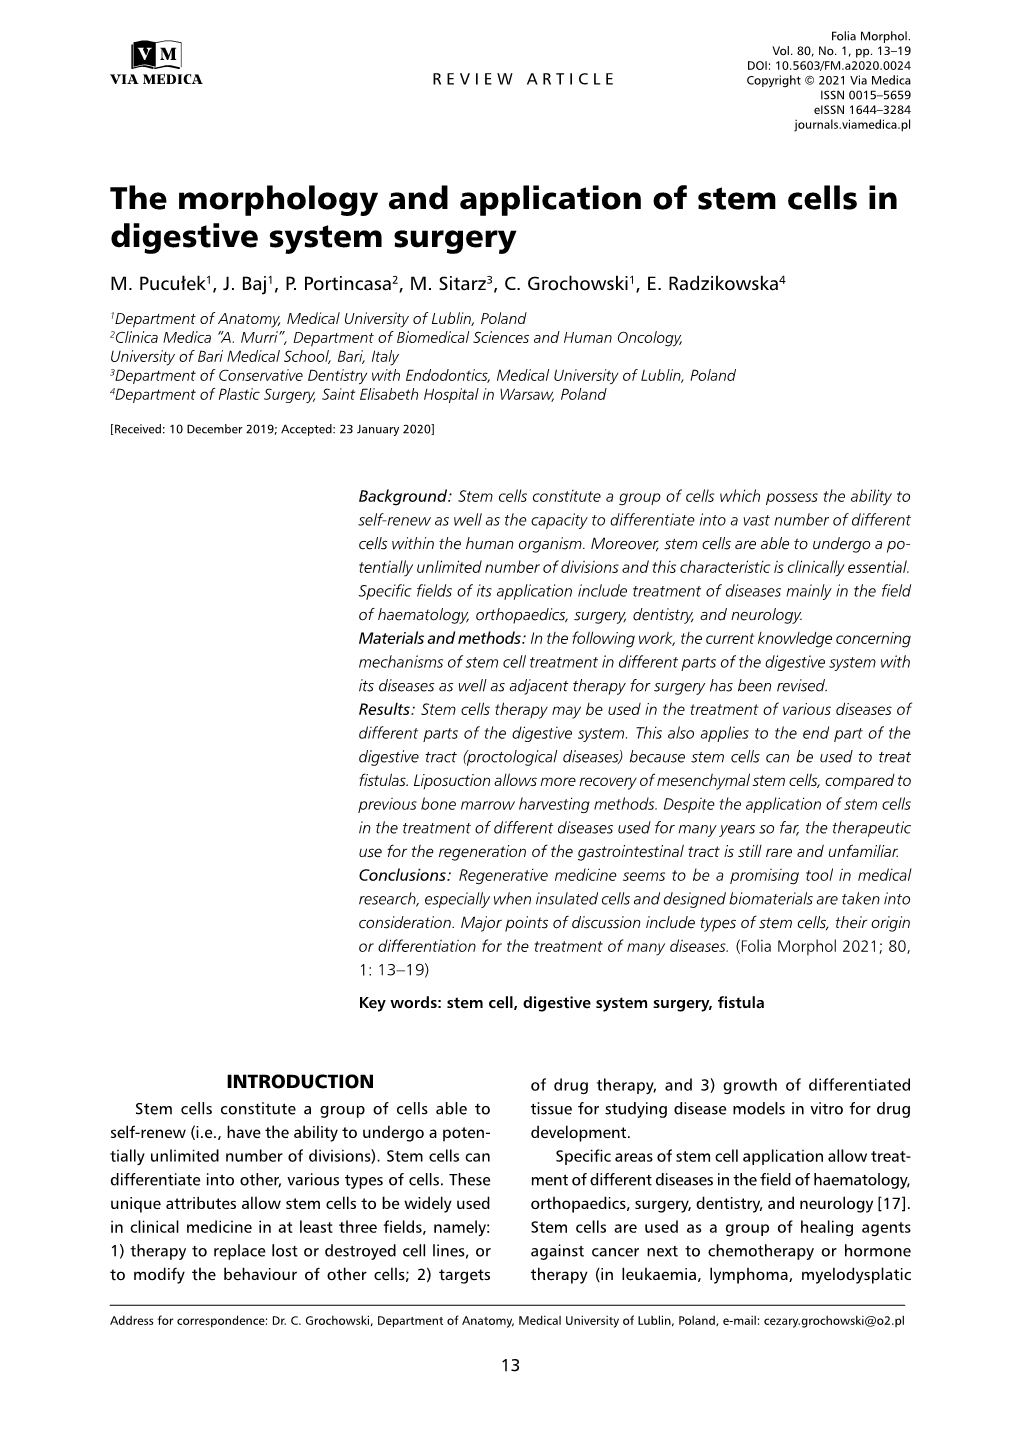 The Morphology and Application of Stem Cells in Digestive System Surgery M